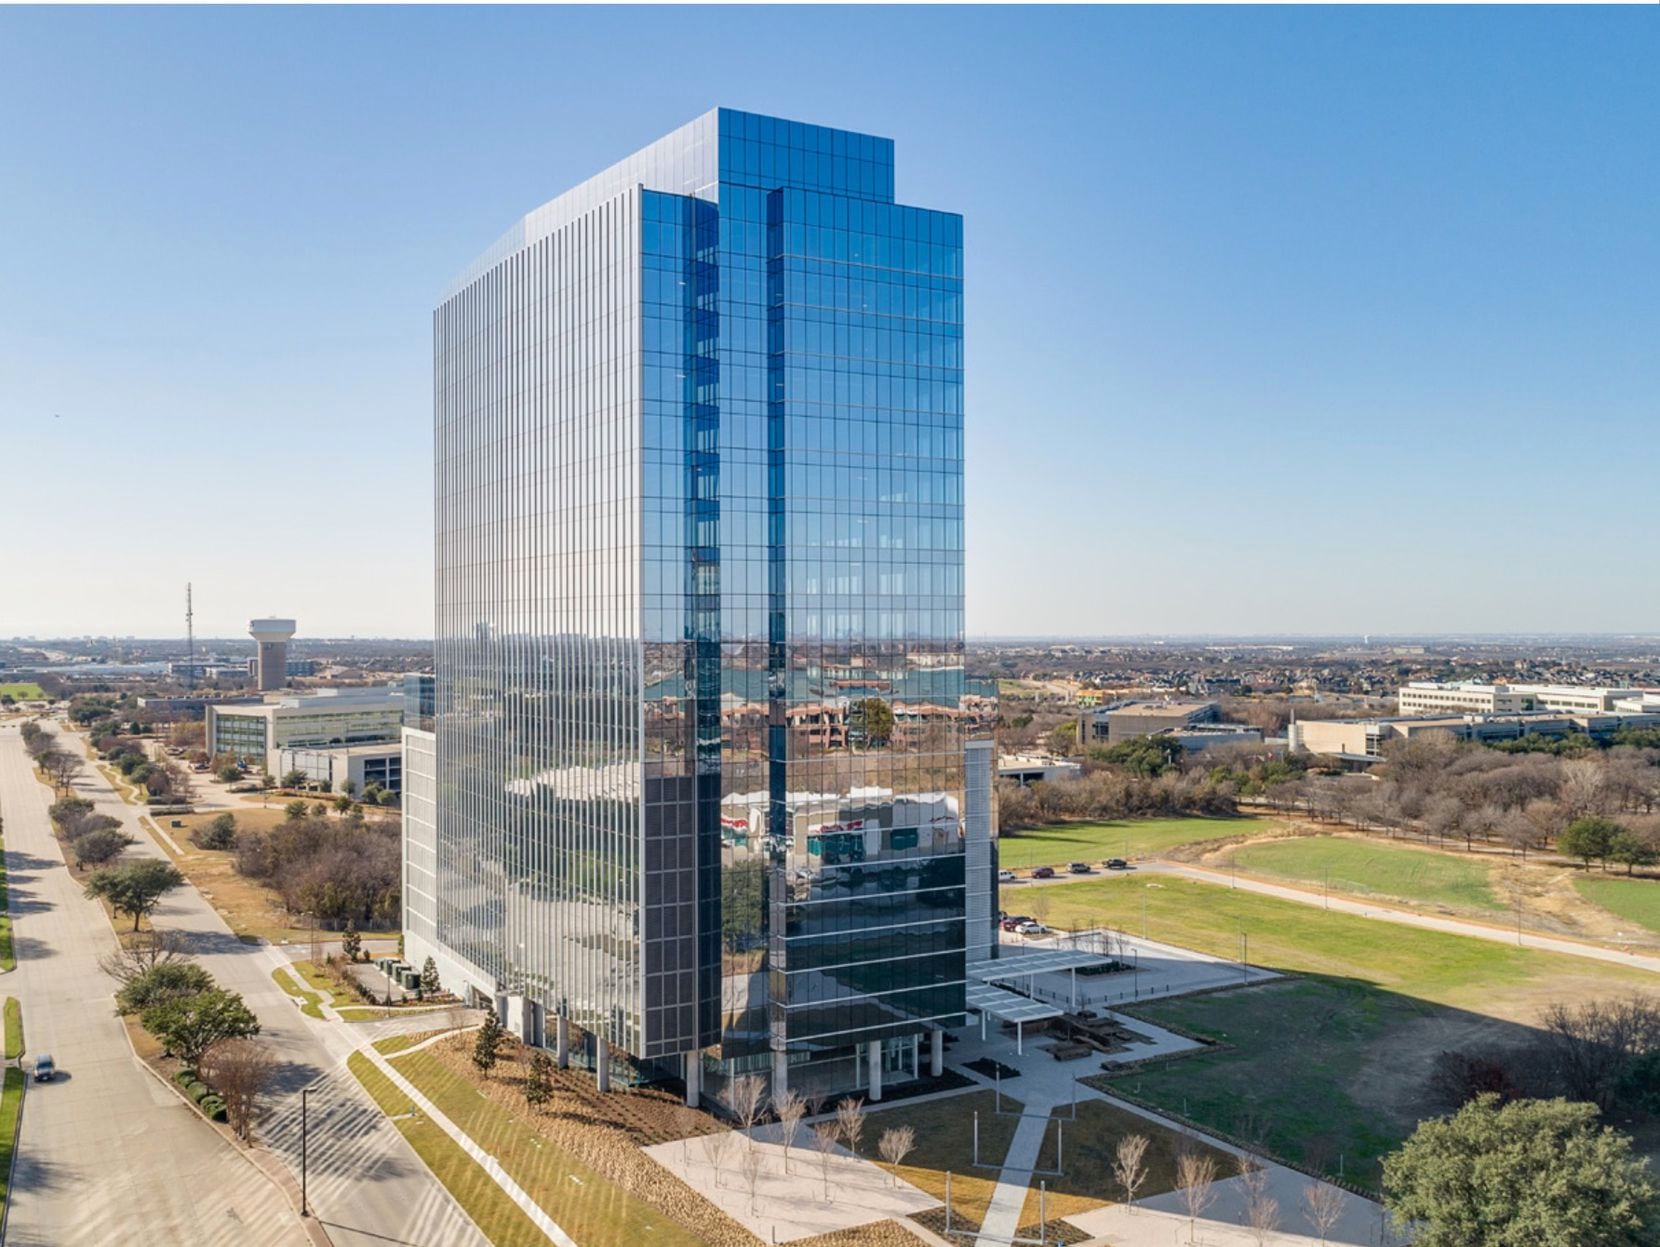 The new Plano office tower was built as the headquarters of Reata Pharmaceuticals but is now being offered for sublease.